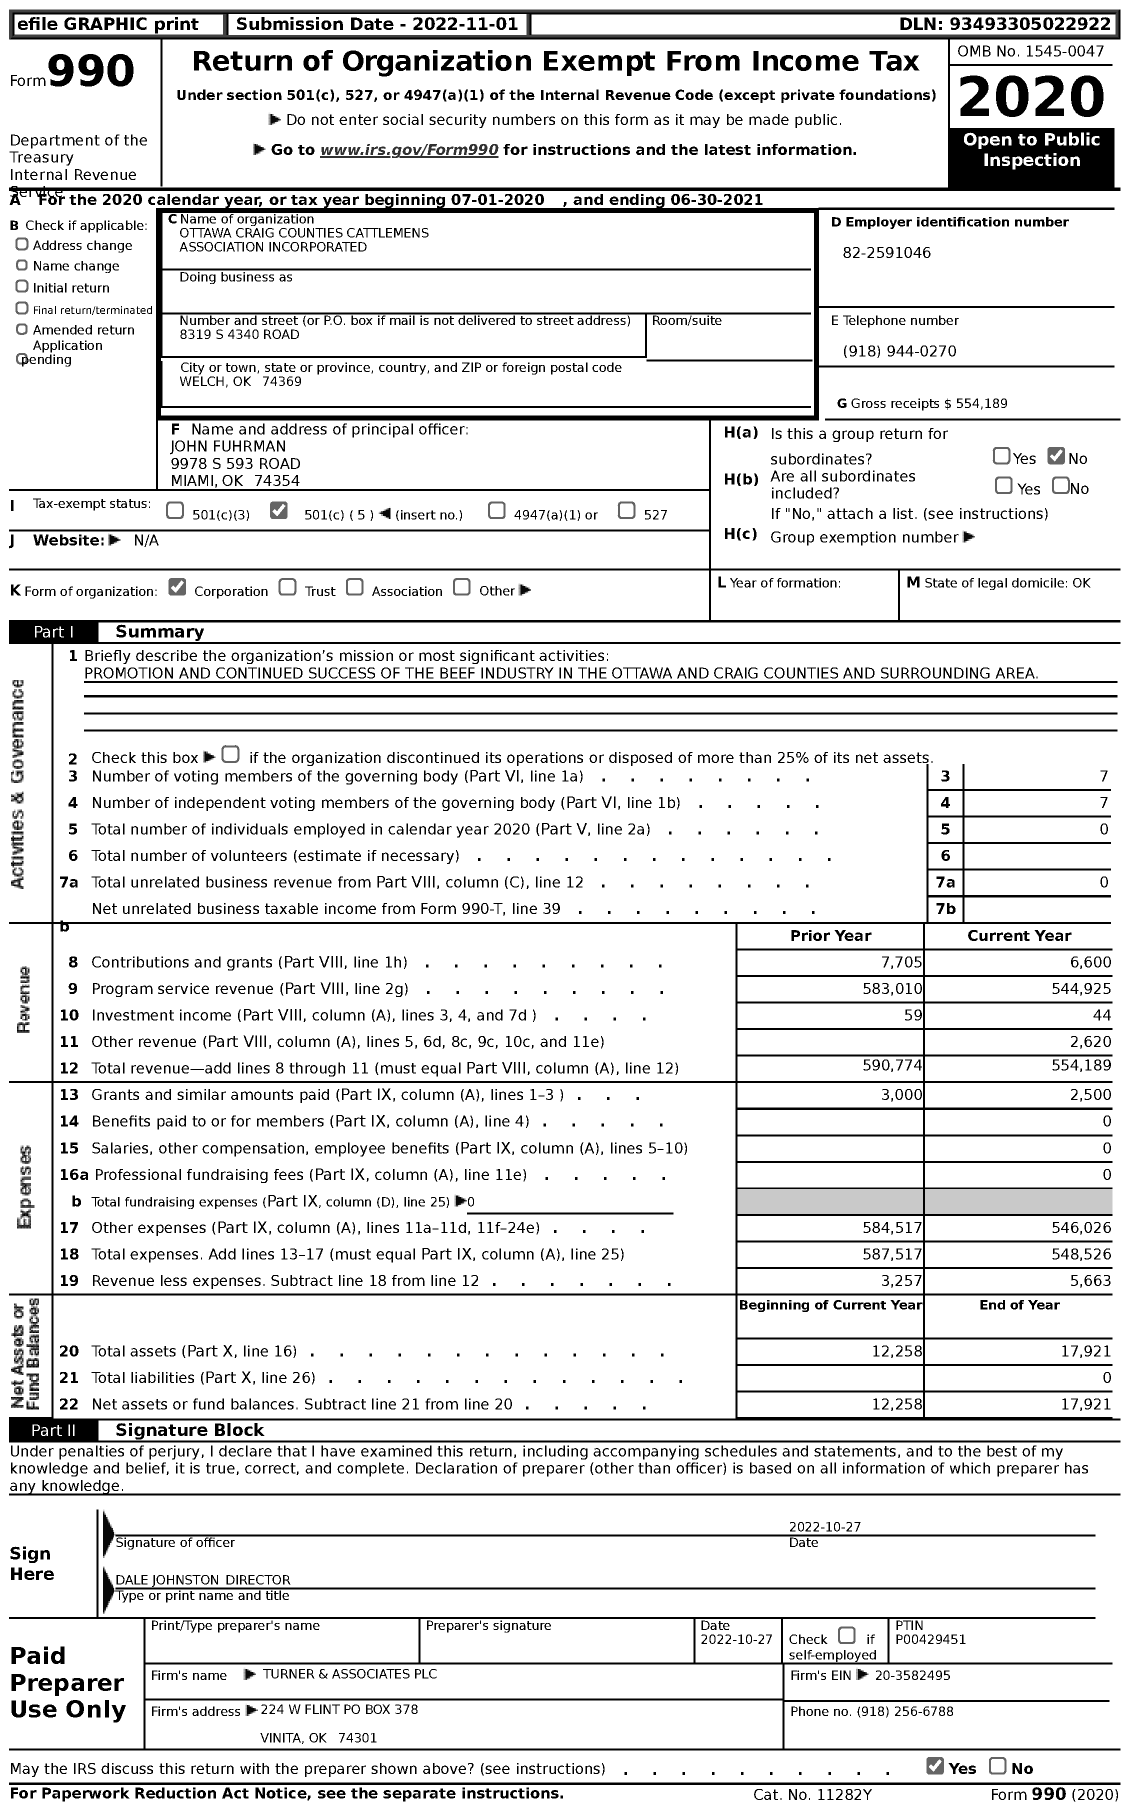 Image of first page of 2020 Form 990 for Ottawa Craig Counties Cattlemens Association Incorporated